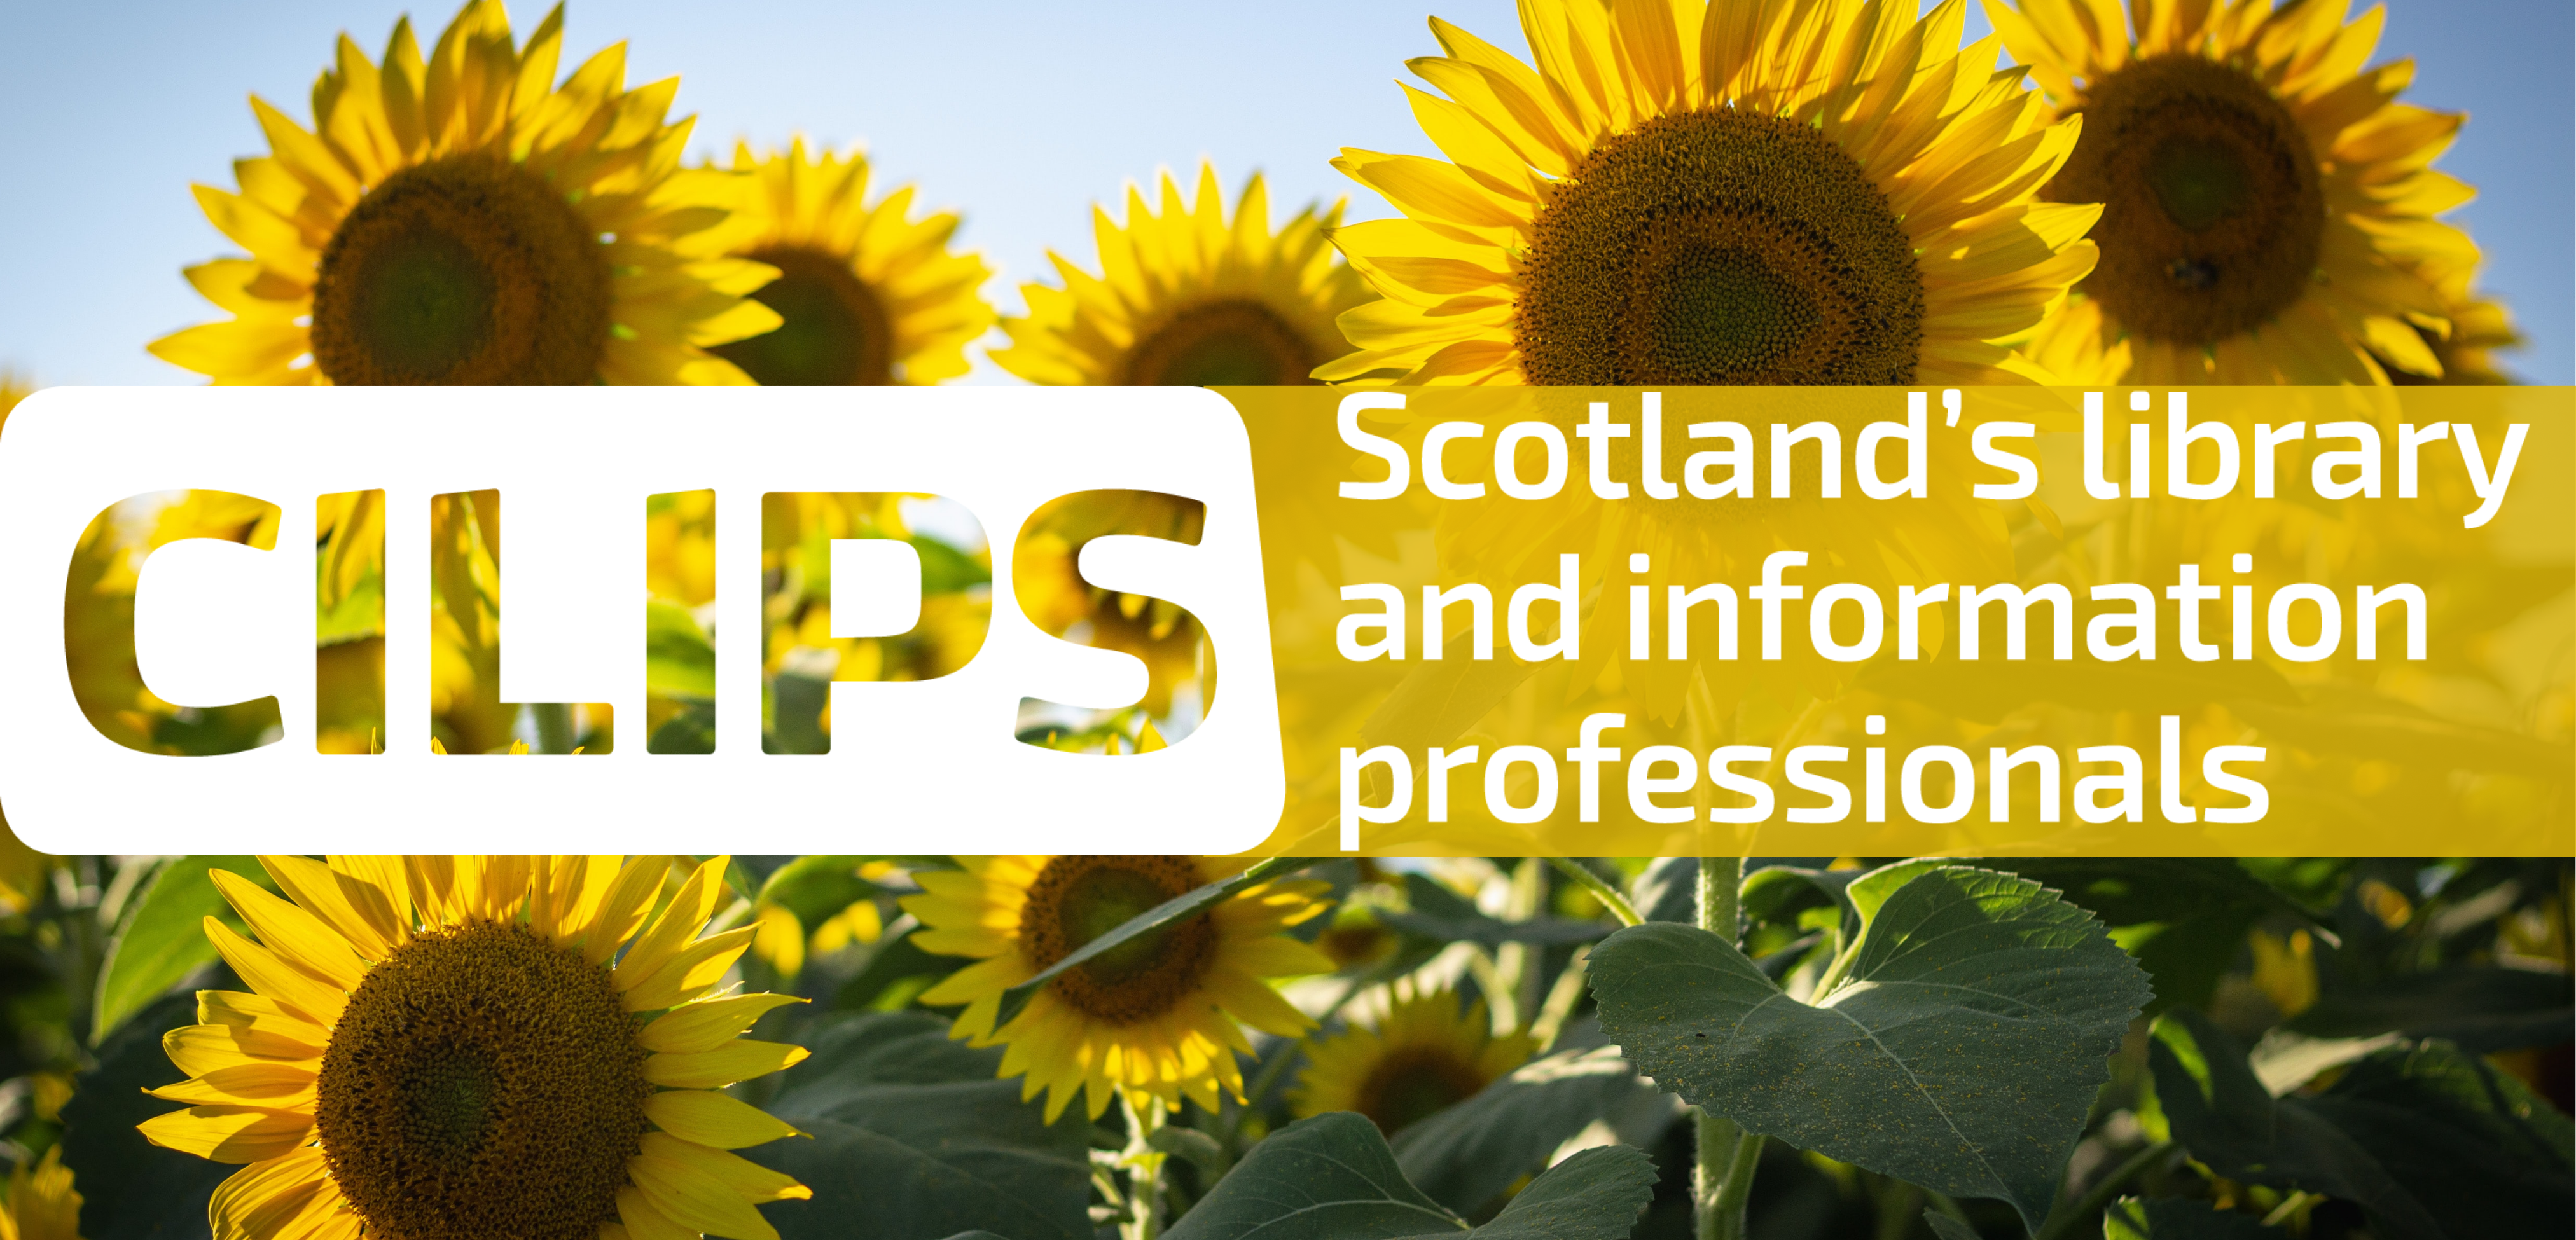 CILIPS Accessibility and Neurodiversity with white text on a yellow-green sunflower background.